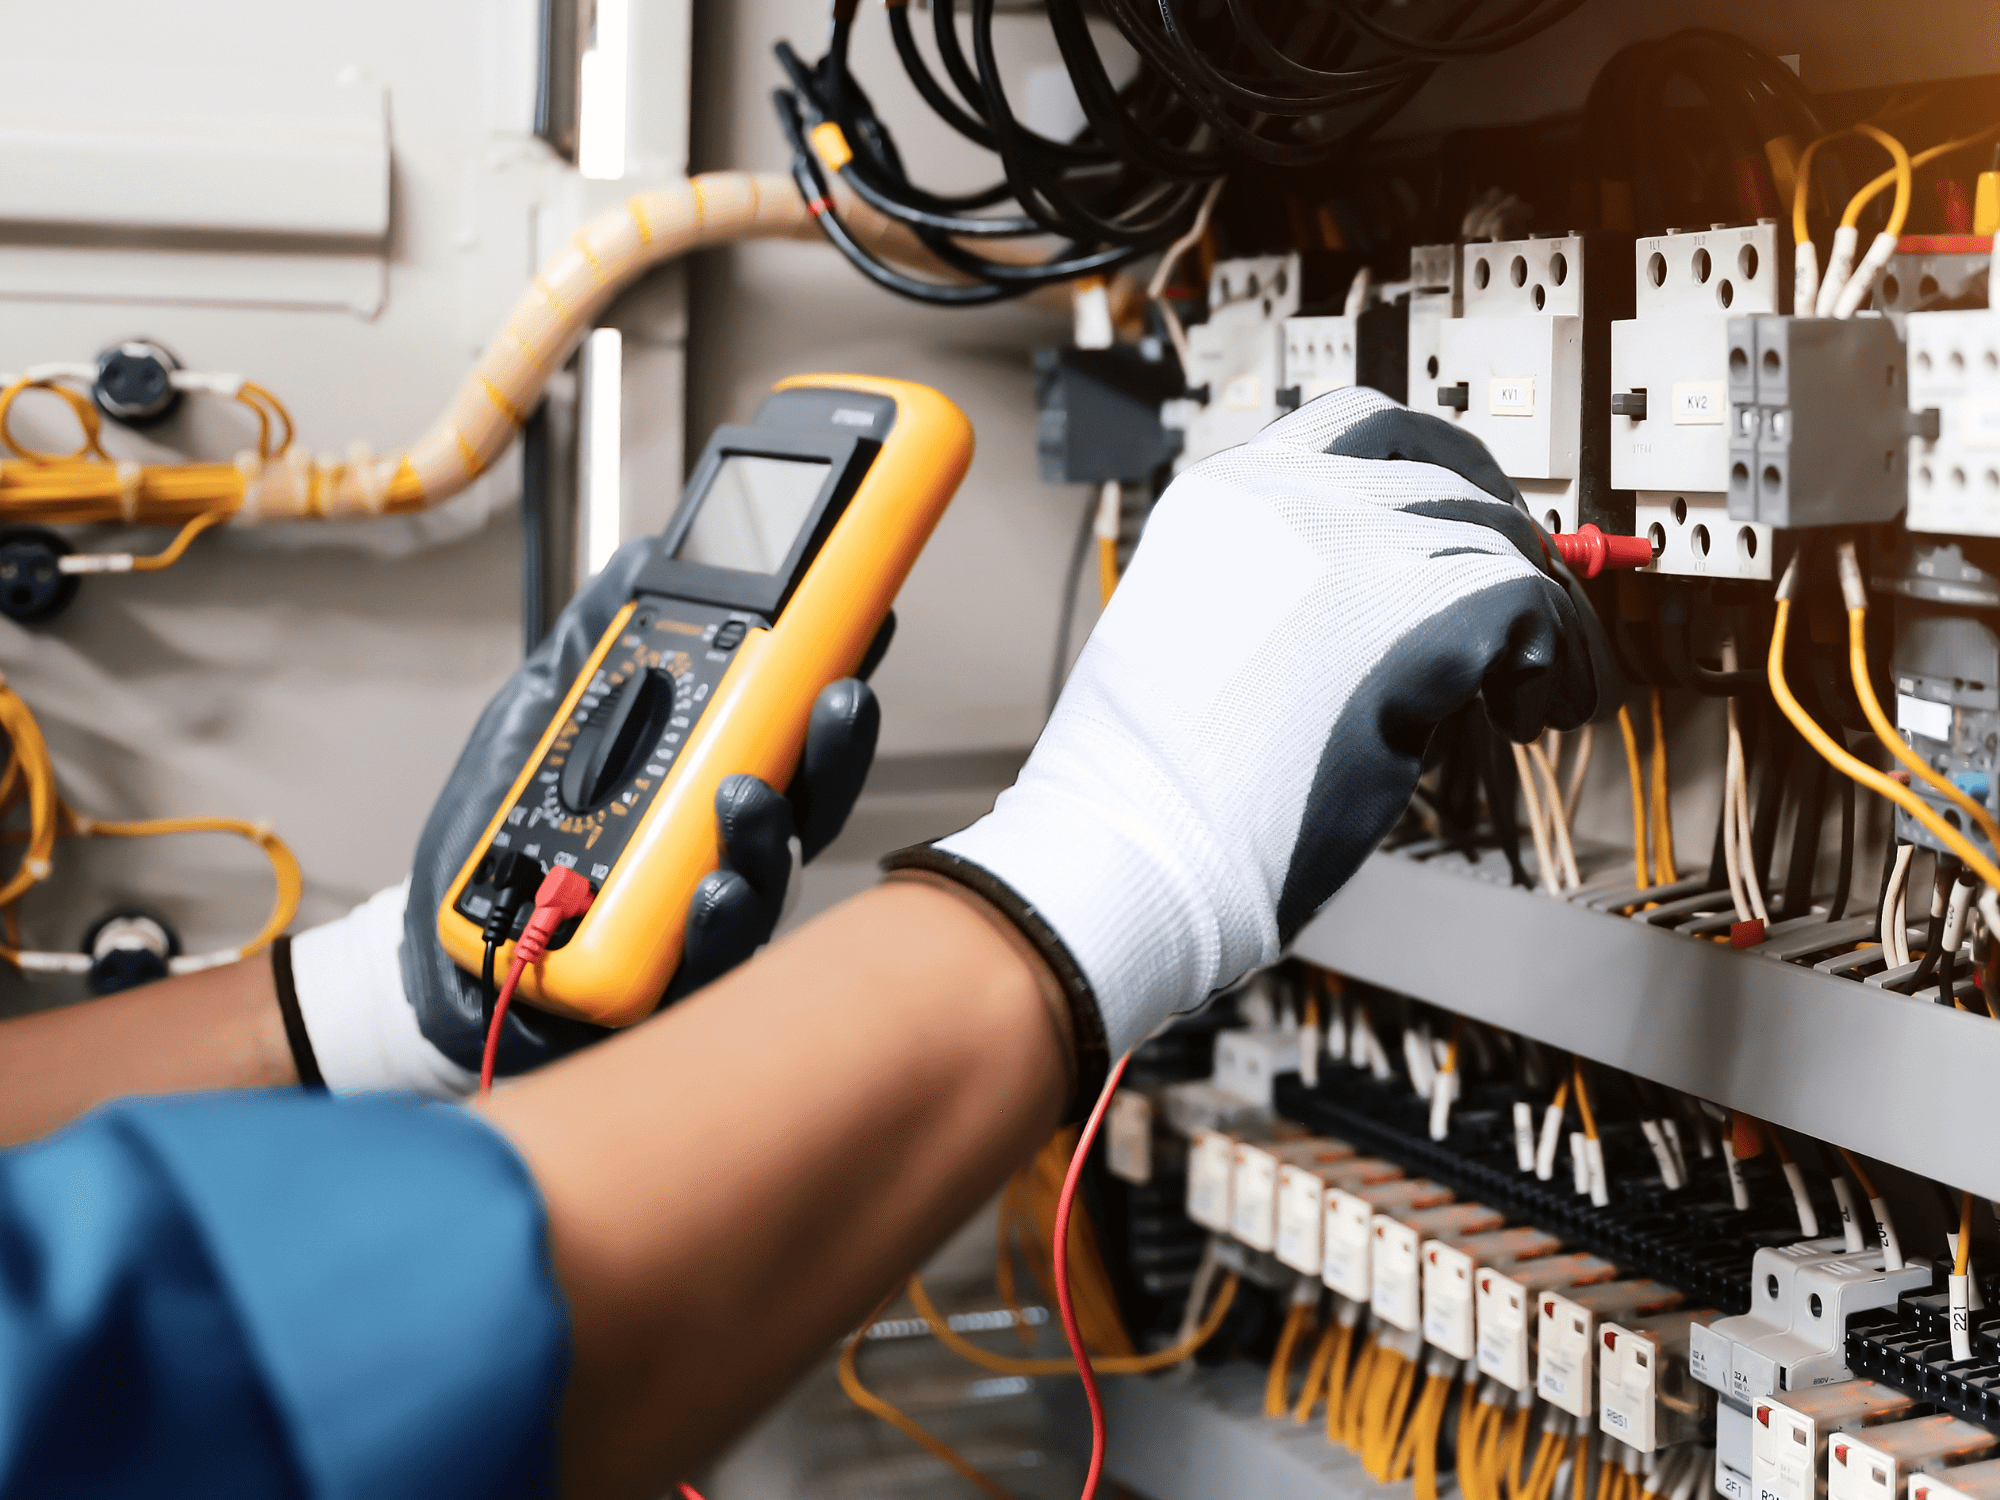 Electrical Person Wearing Safety Gloves Testing Wires